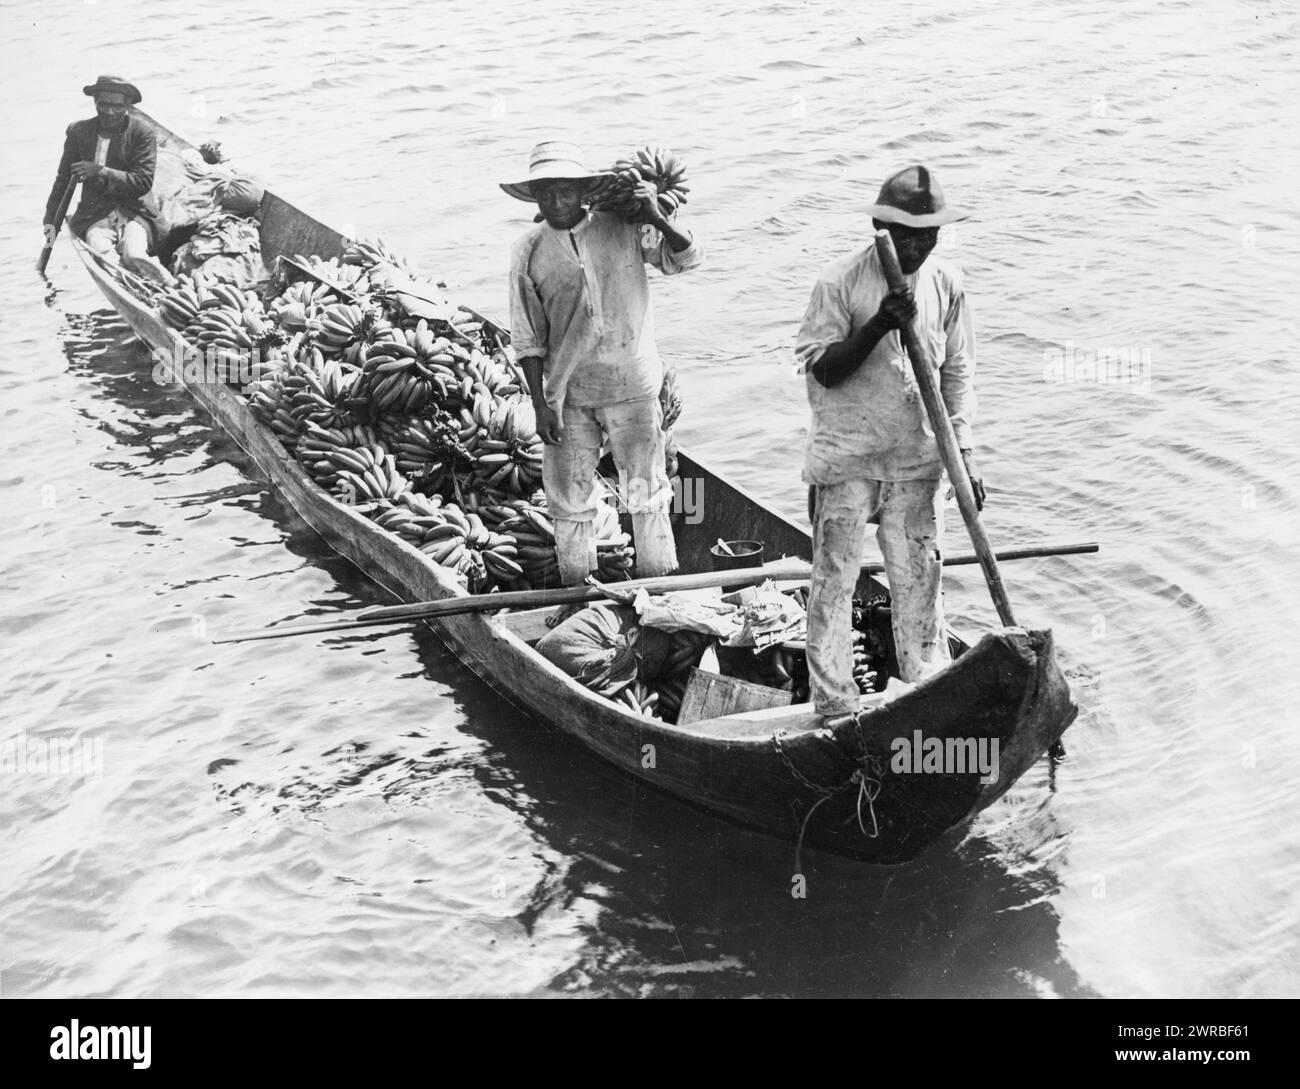 Three men in a boat transporting bananas to the city markets in Panama, Carpenter, Frank G. (Frank George), 1855-1924, collector, between 1890 and 1923, Bananas, Panama, 1890-1930, Photographic prints, 1890-1930., Photographic prints, 1890-1930, 1 photographic print Stock Photo